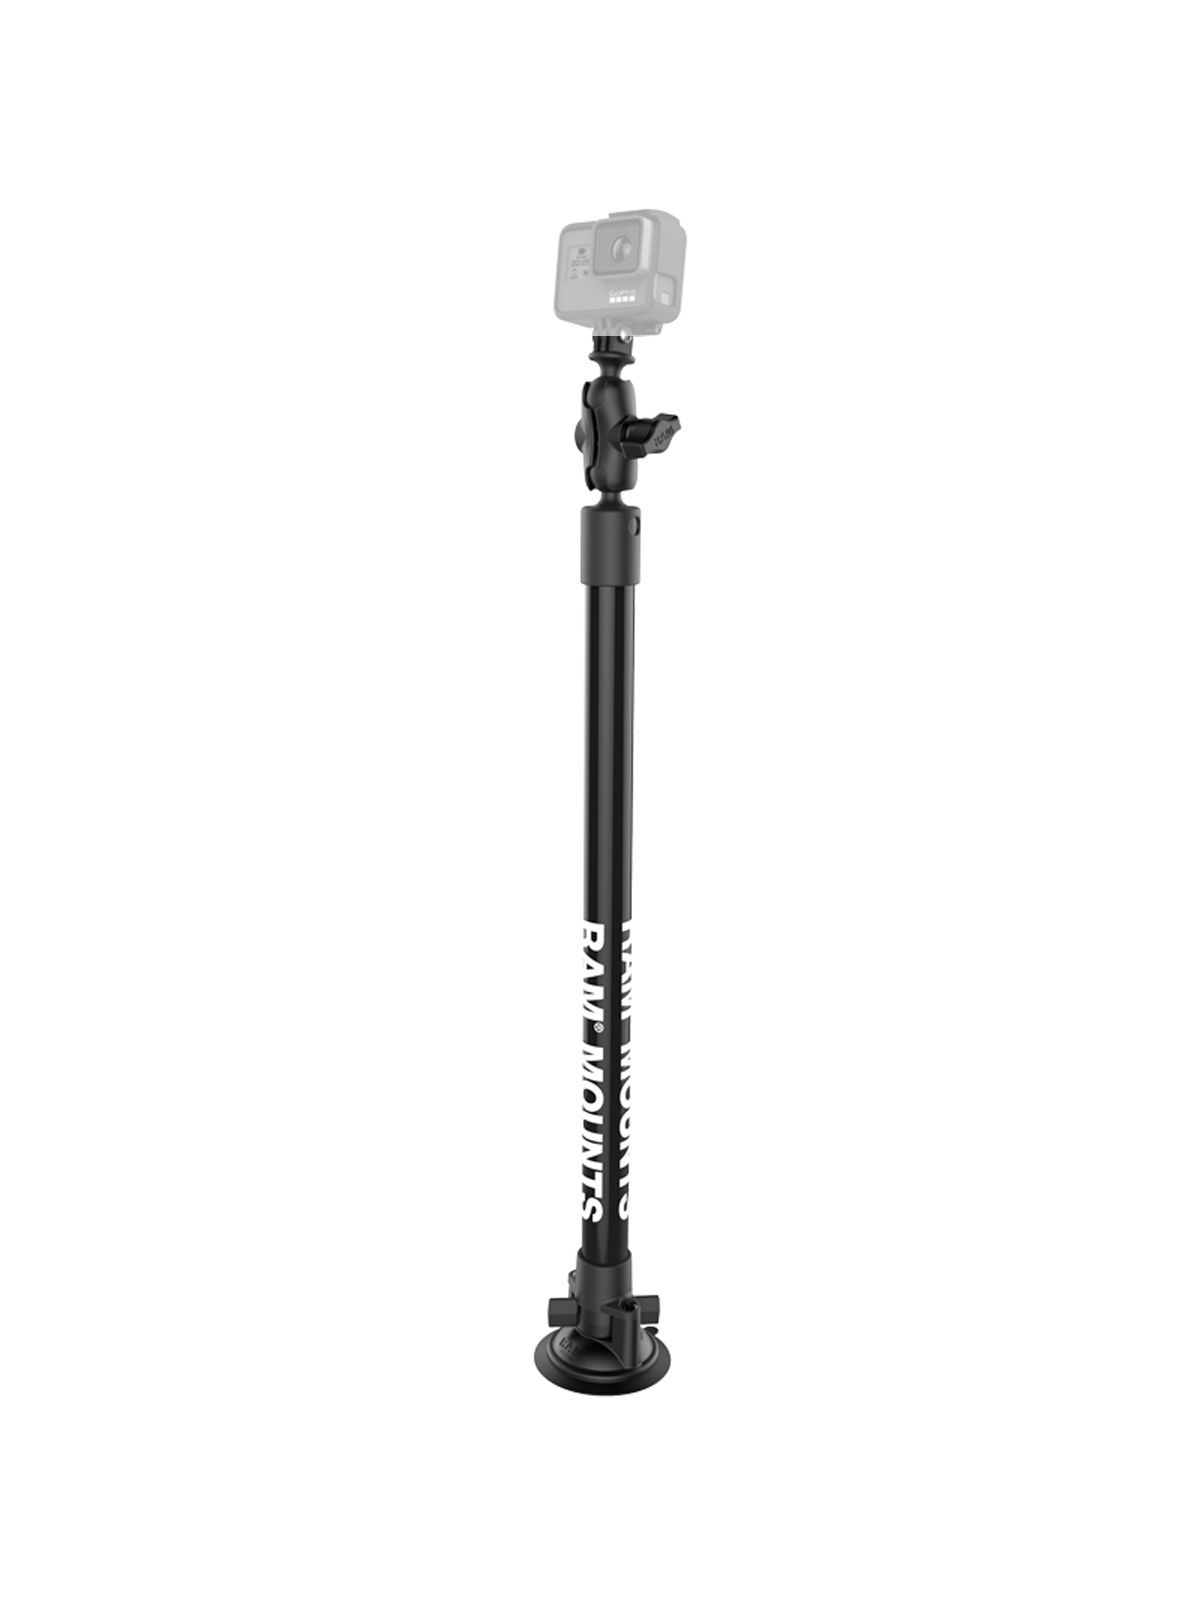 RAM Mounts Twist-Lock Suction Mount with 18" Pole & Action Camera Adapter - B-Ball